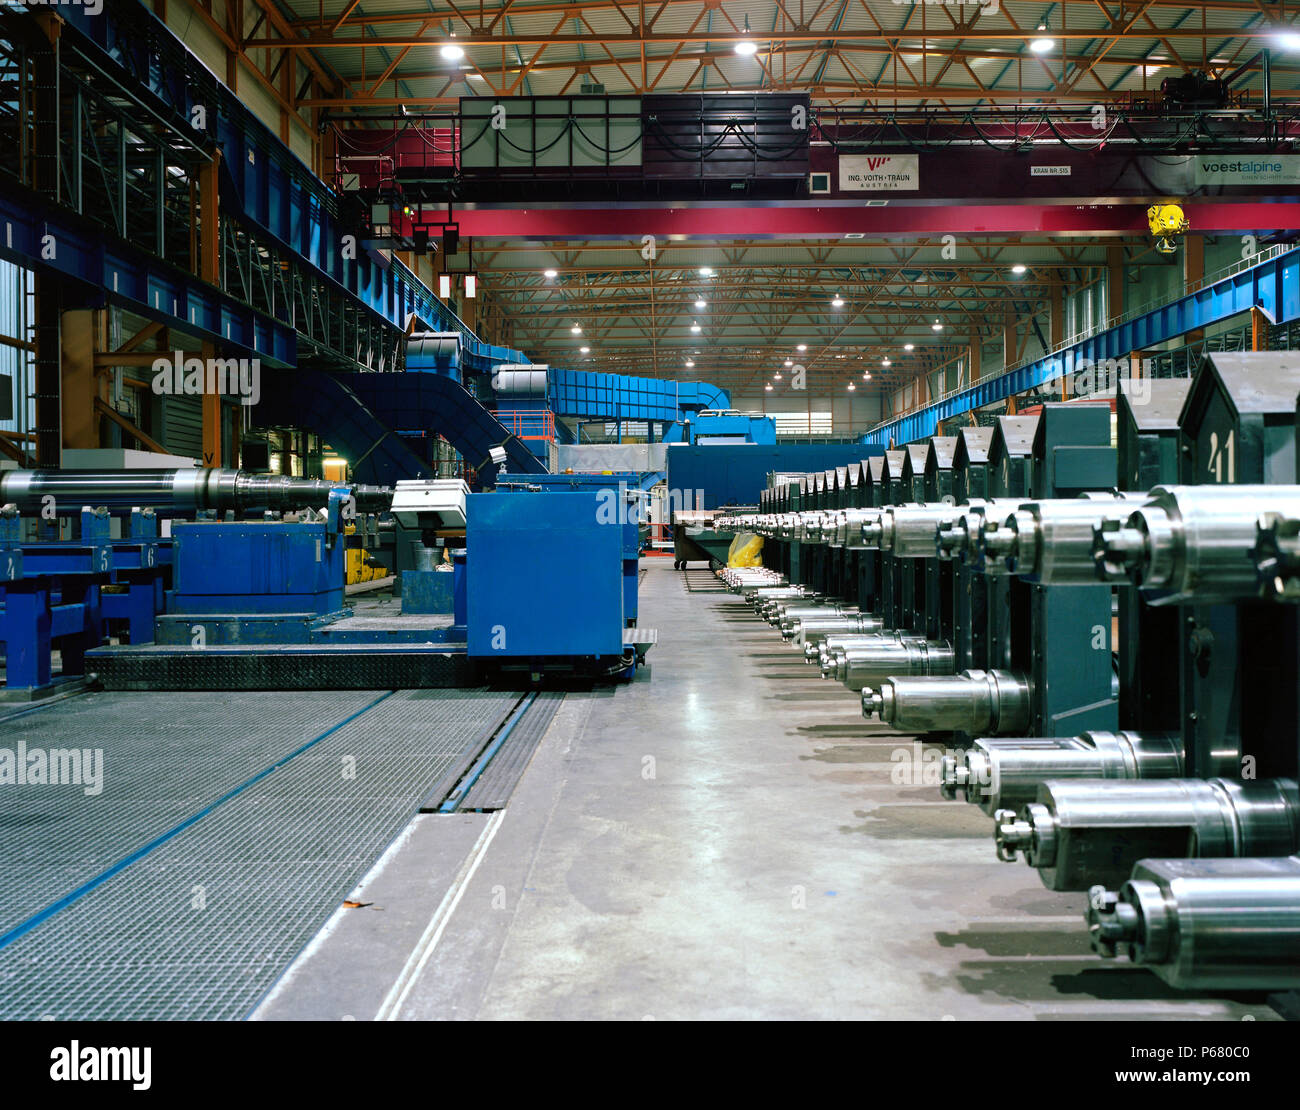 Voest Alpine Steel Factory. Voestalpine AG is an international steel company based in Linz, Austria. The company is active in steel, automotive, railw Stock Photo